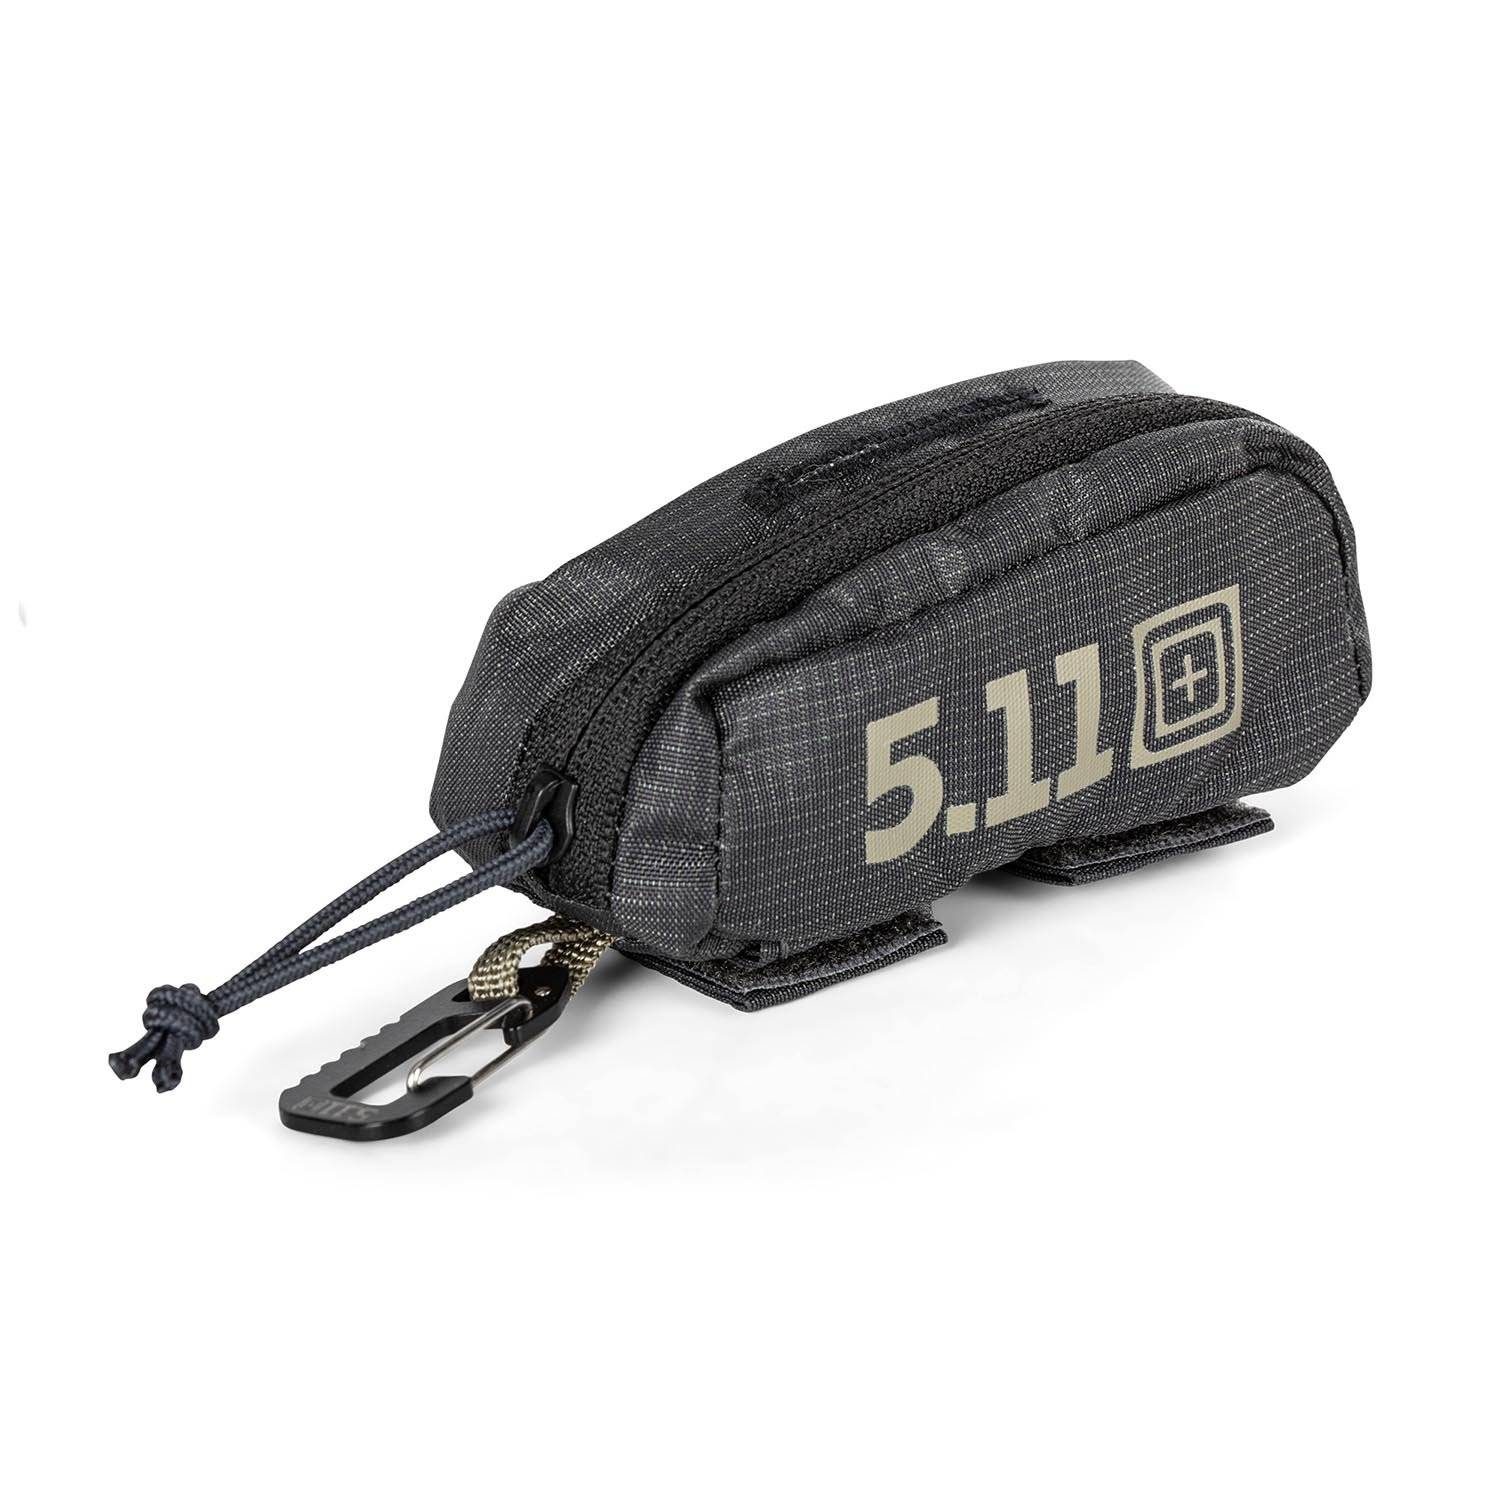 5.11 Tactical Mission Ready K9 Waste Pouch